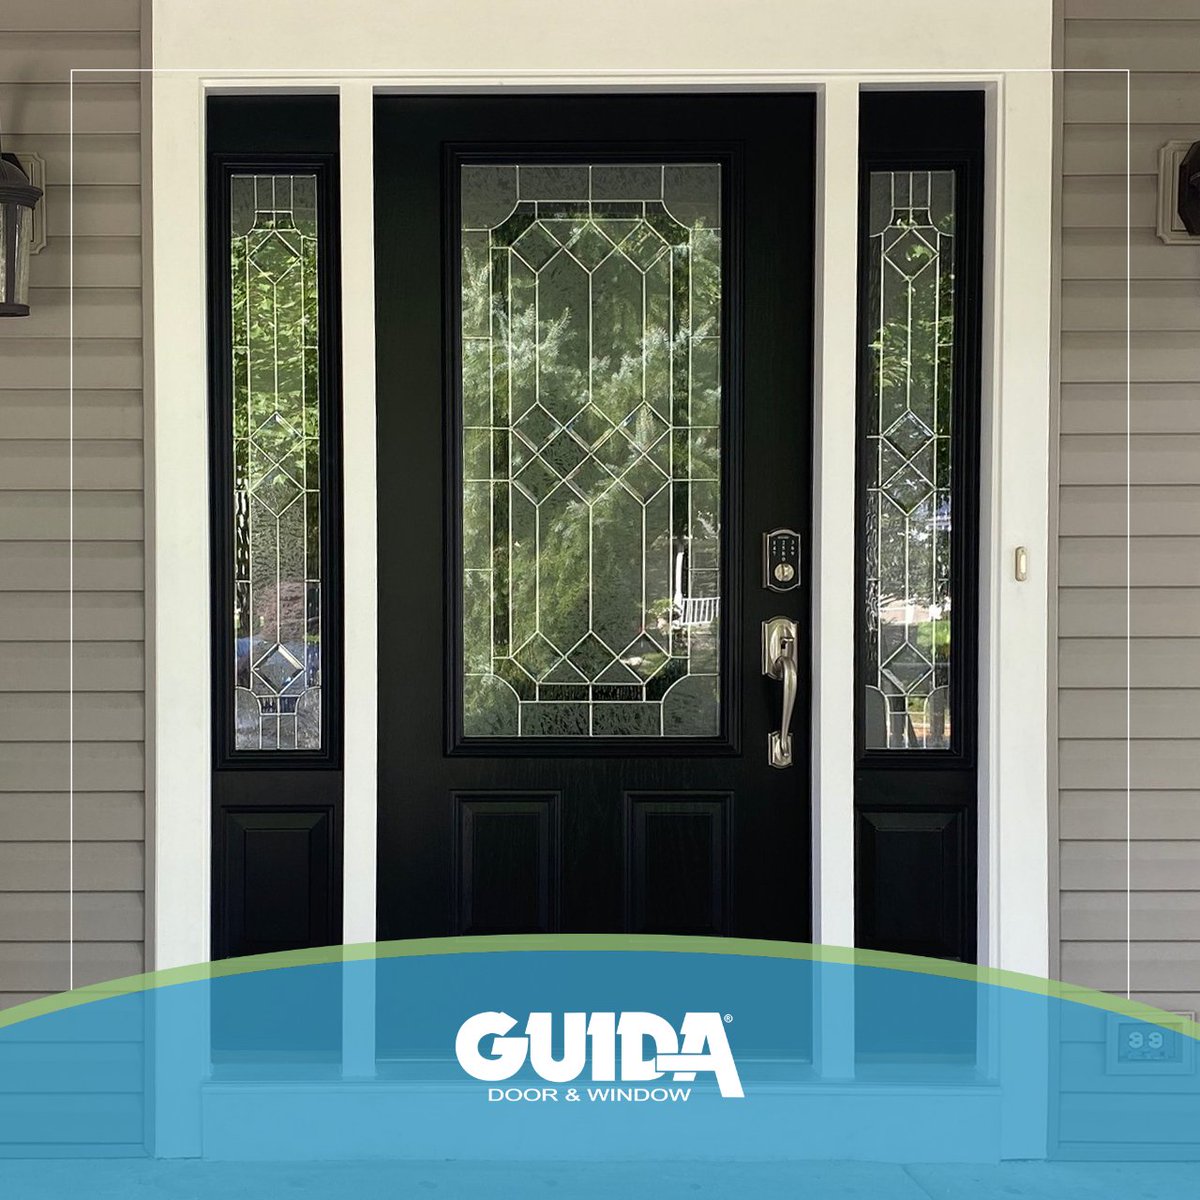 Choose quality that lasts a lifetime for your home. 💪🏡 Invest in excellence with our durable products that enhance beauty and functionality. Discover the difference today!

#QualityProducts #HomeInvestment #GuidaQuality #LongLasting #HomeUpgrade #Guida #GuidaDoors